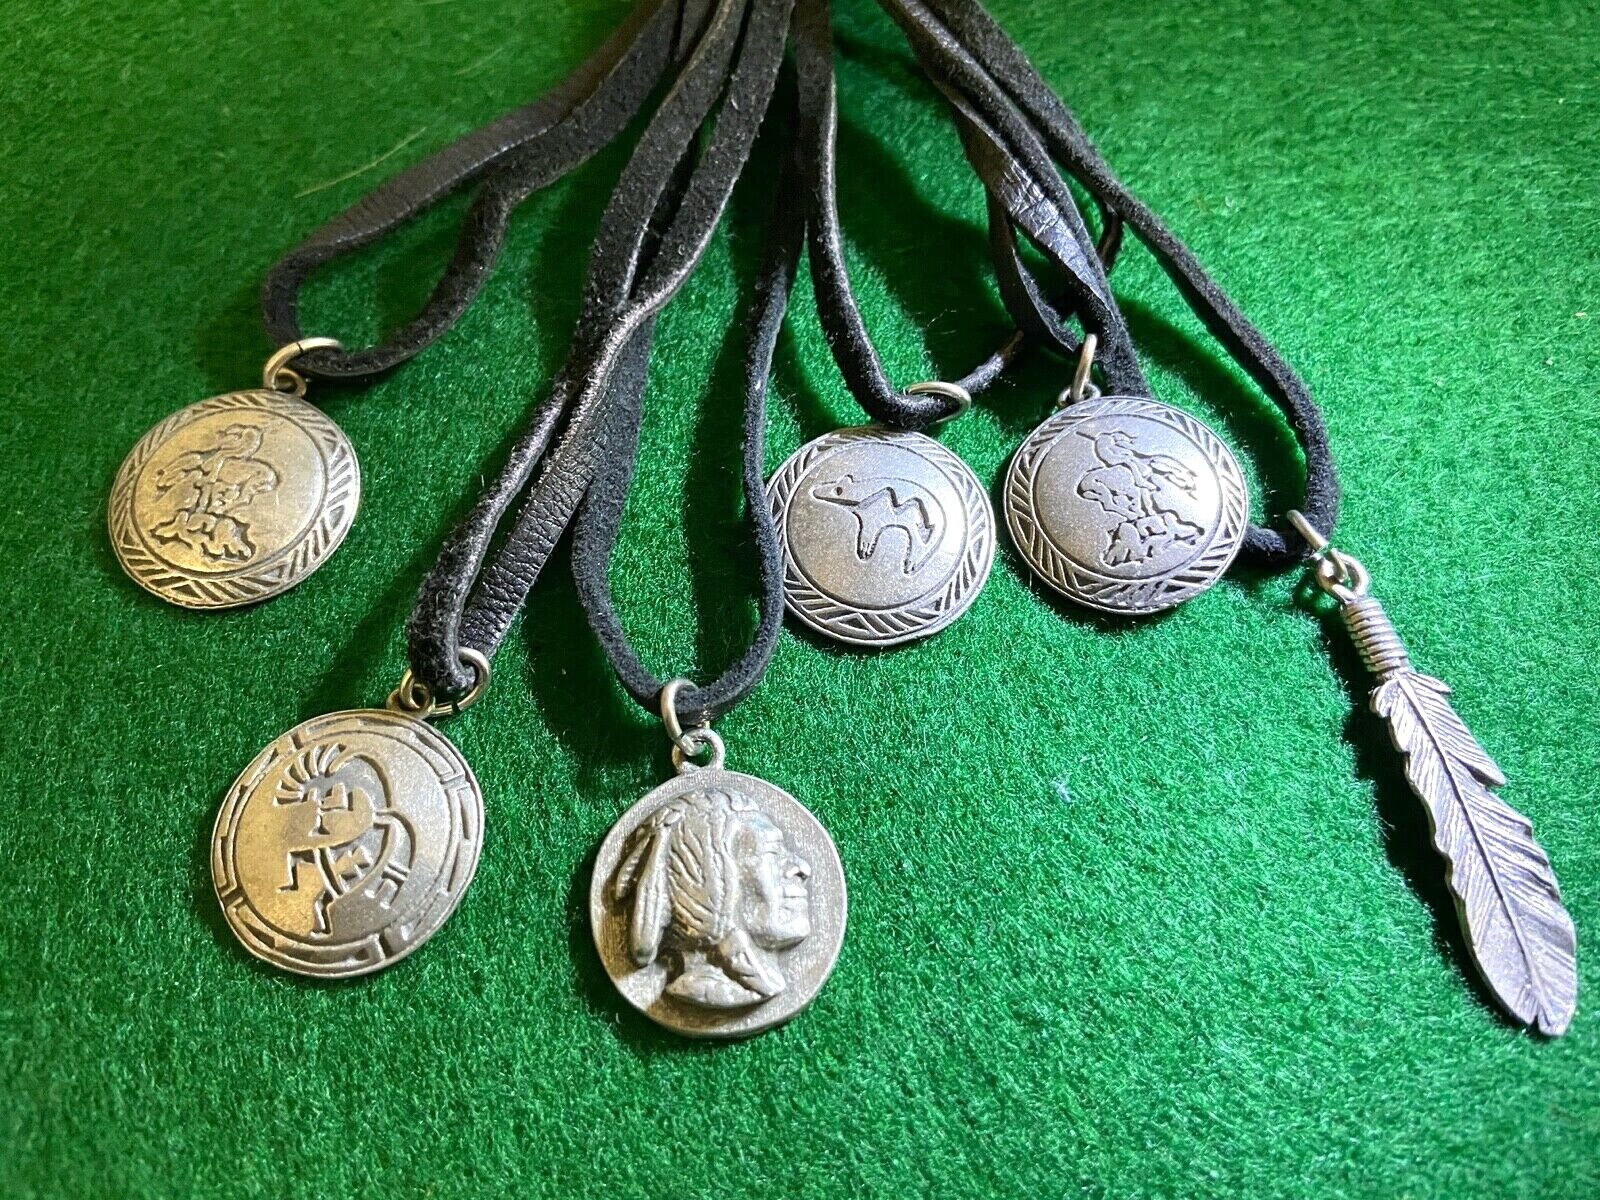 Lot of 6 - Western Style Pendants w/Leather Cord Necklace Unknown